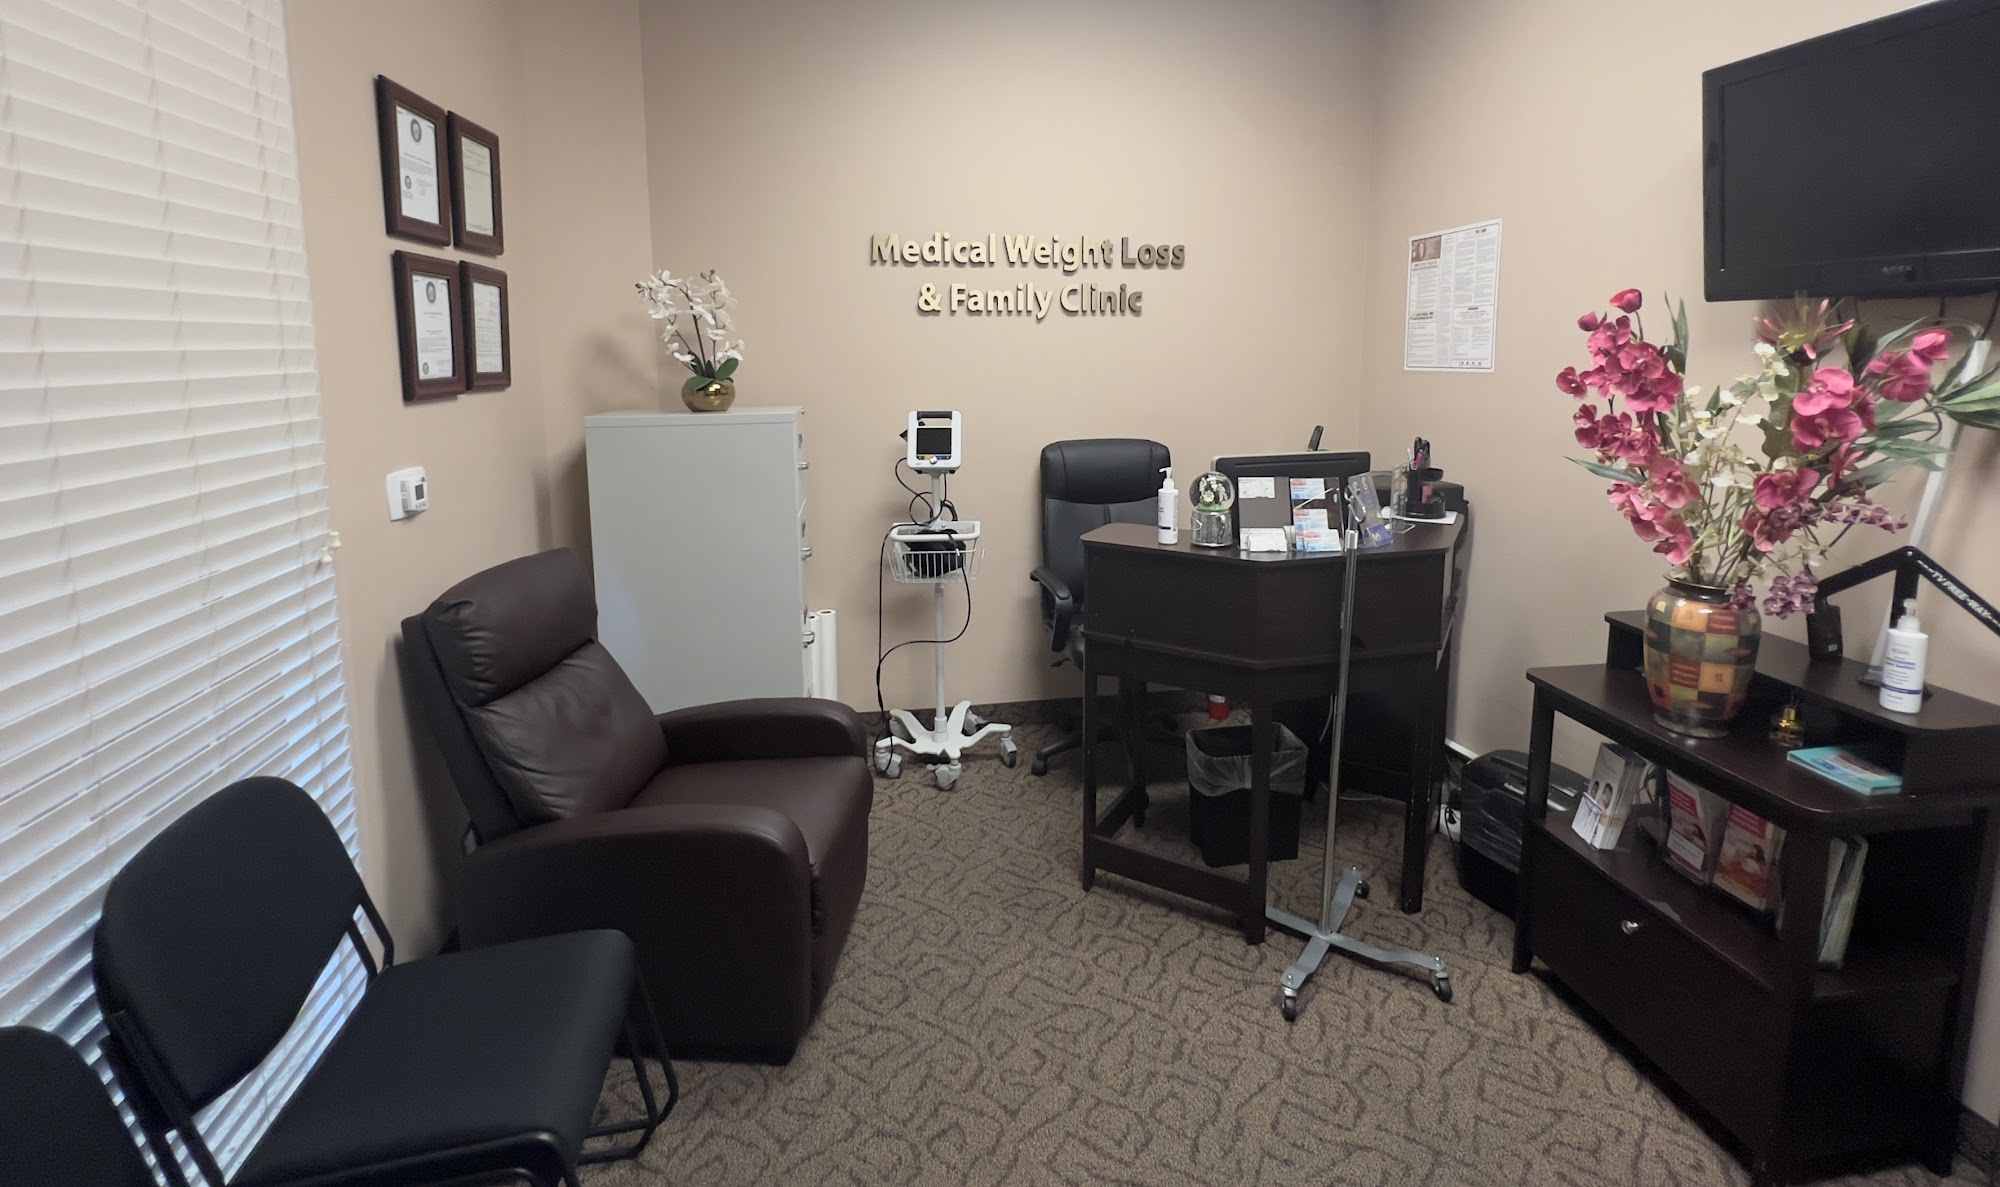 Medical Weight Loss & Family Clinic